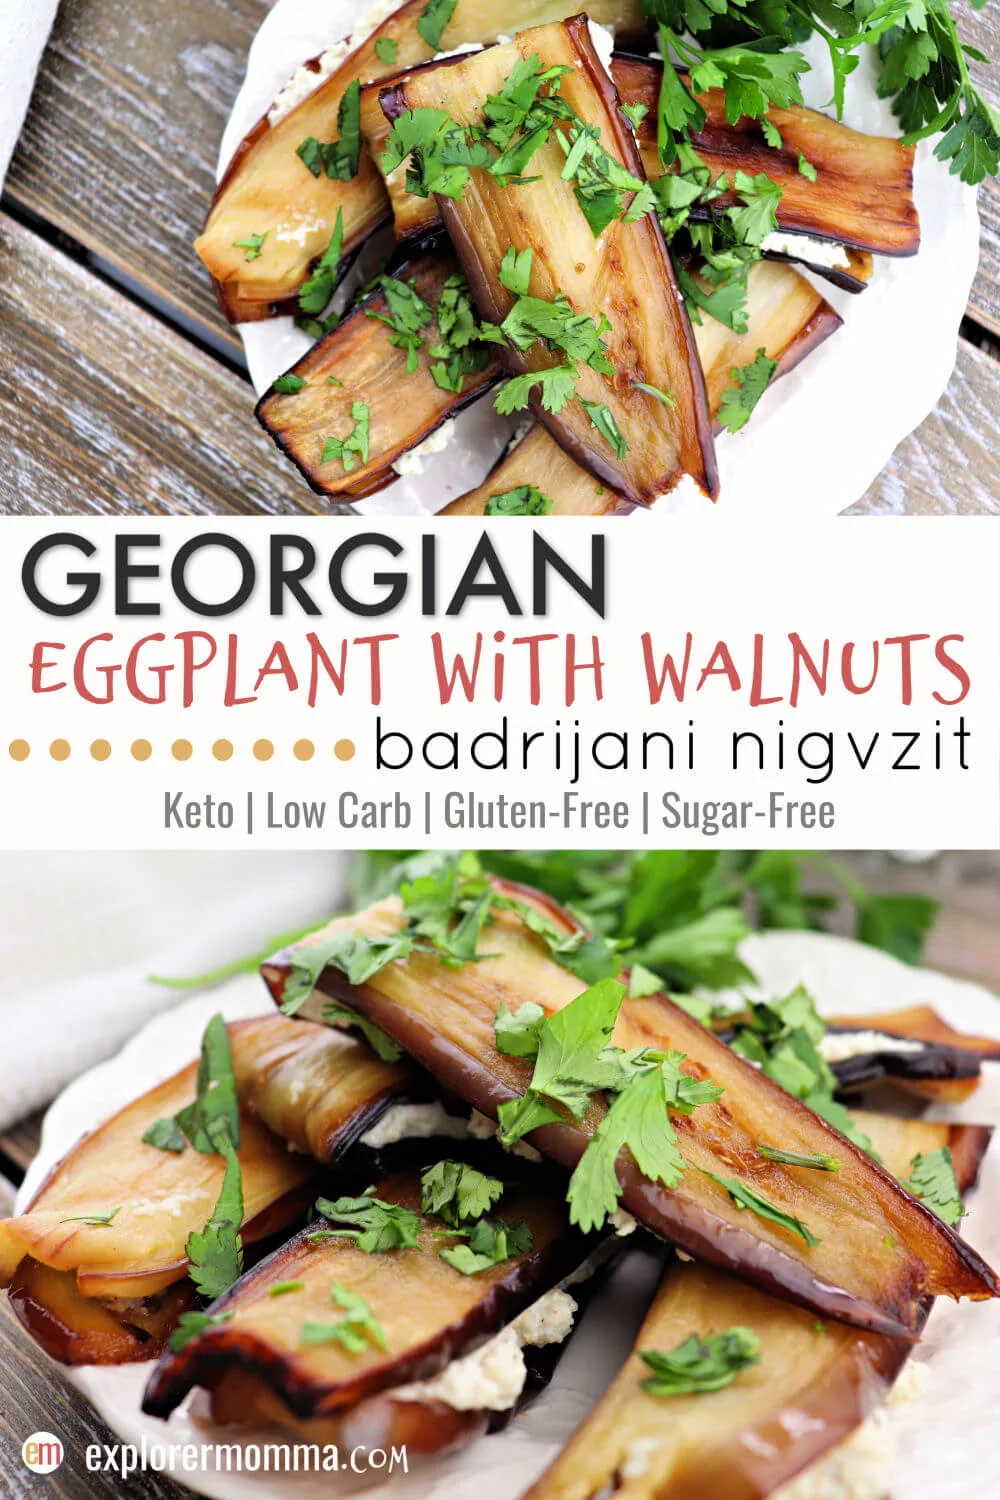 Georgian eggplant with walnuts is a fabulous keto side dish that's a staple for any Georgian dinner. Low carb and gluten-free, full of flavor! #ketosides #georgianrecipes